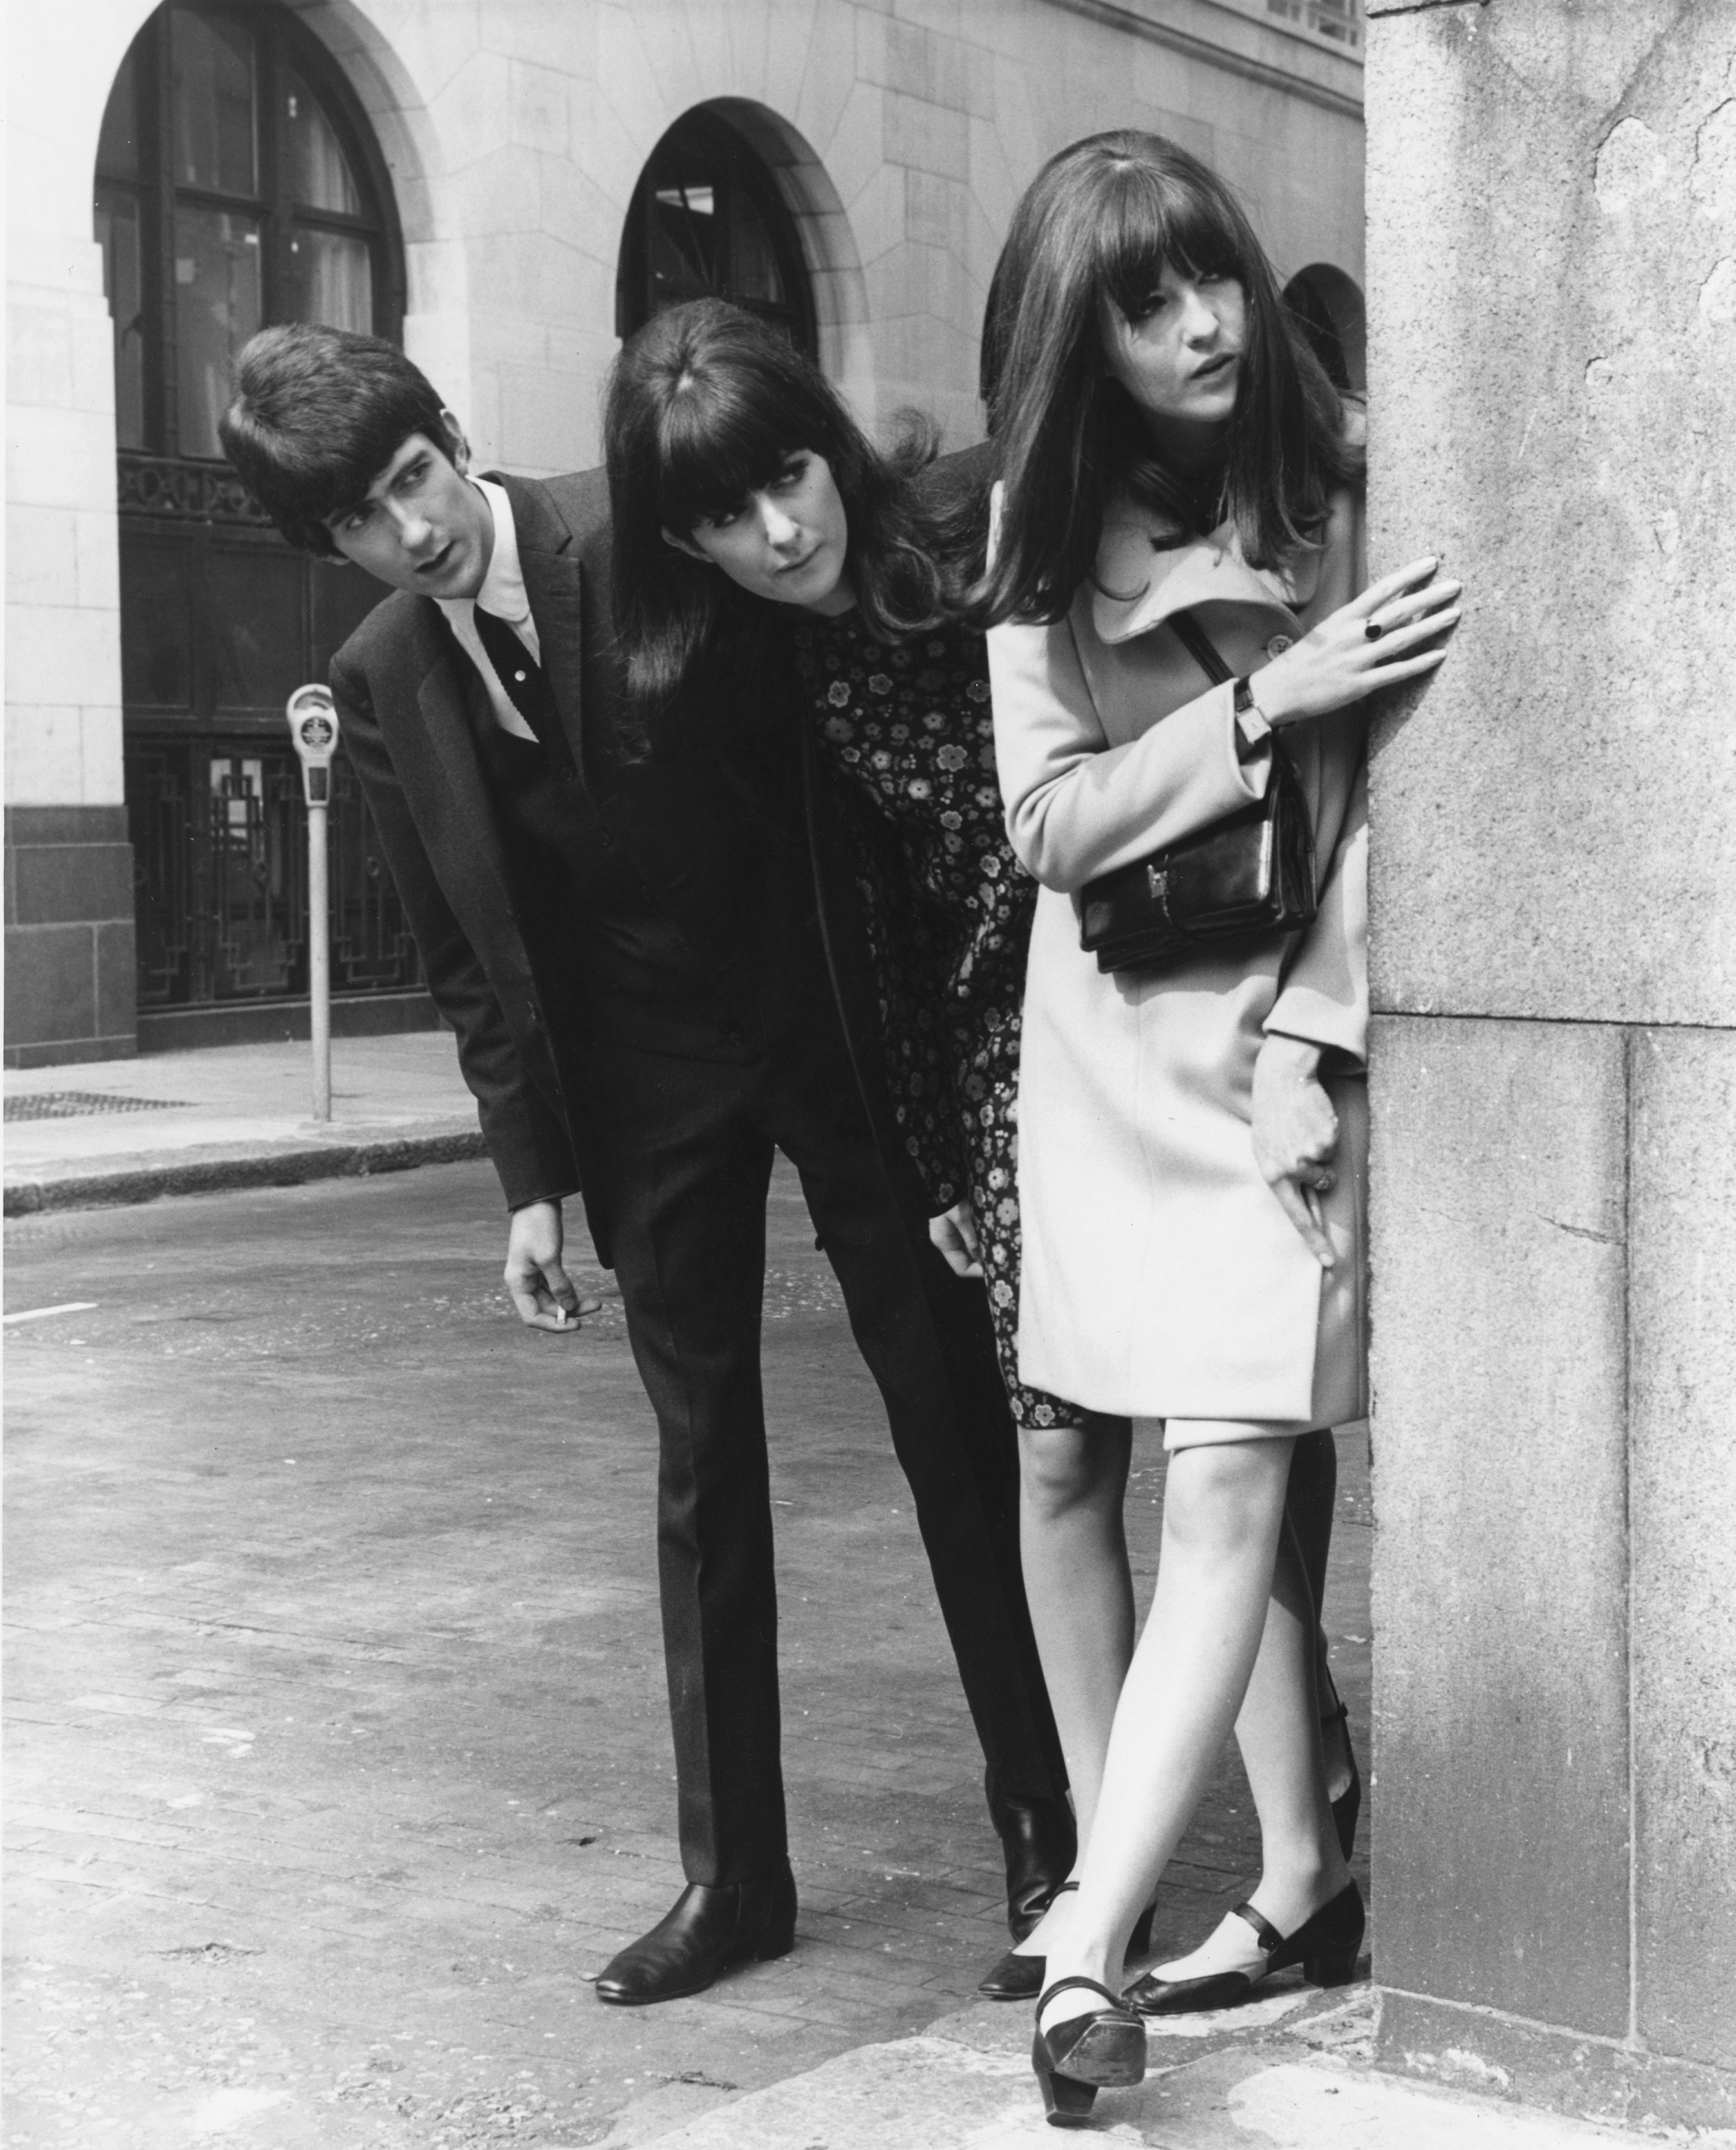 Television presenter Cathy McGowan (right) outside the Savoy Hotel, London, with her brother John and sister Frankie, 4th September 1965. McGowan presents the pop music television show 'Ready Steady Go' and has been attending a lunch at the Savoy for winners of the Melody Maker pop poll. (Photo by William Vanderson/Fox Photos/Hulton Archive/Getty Images)